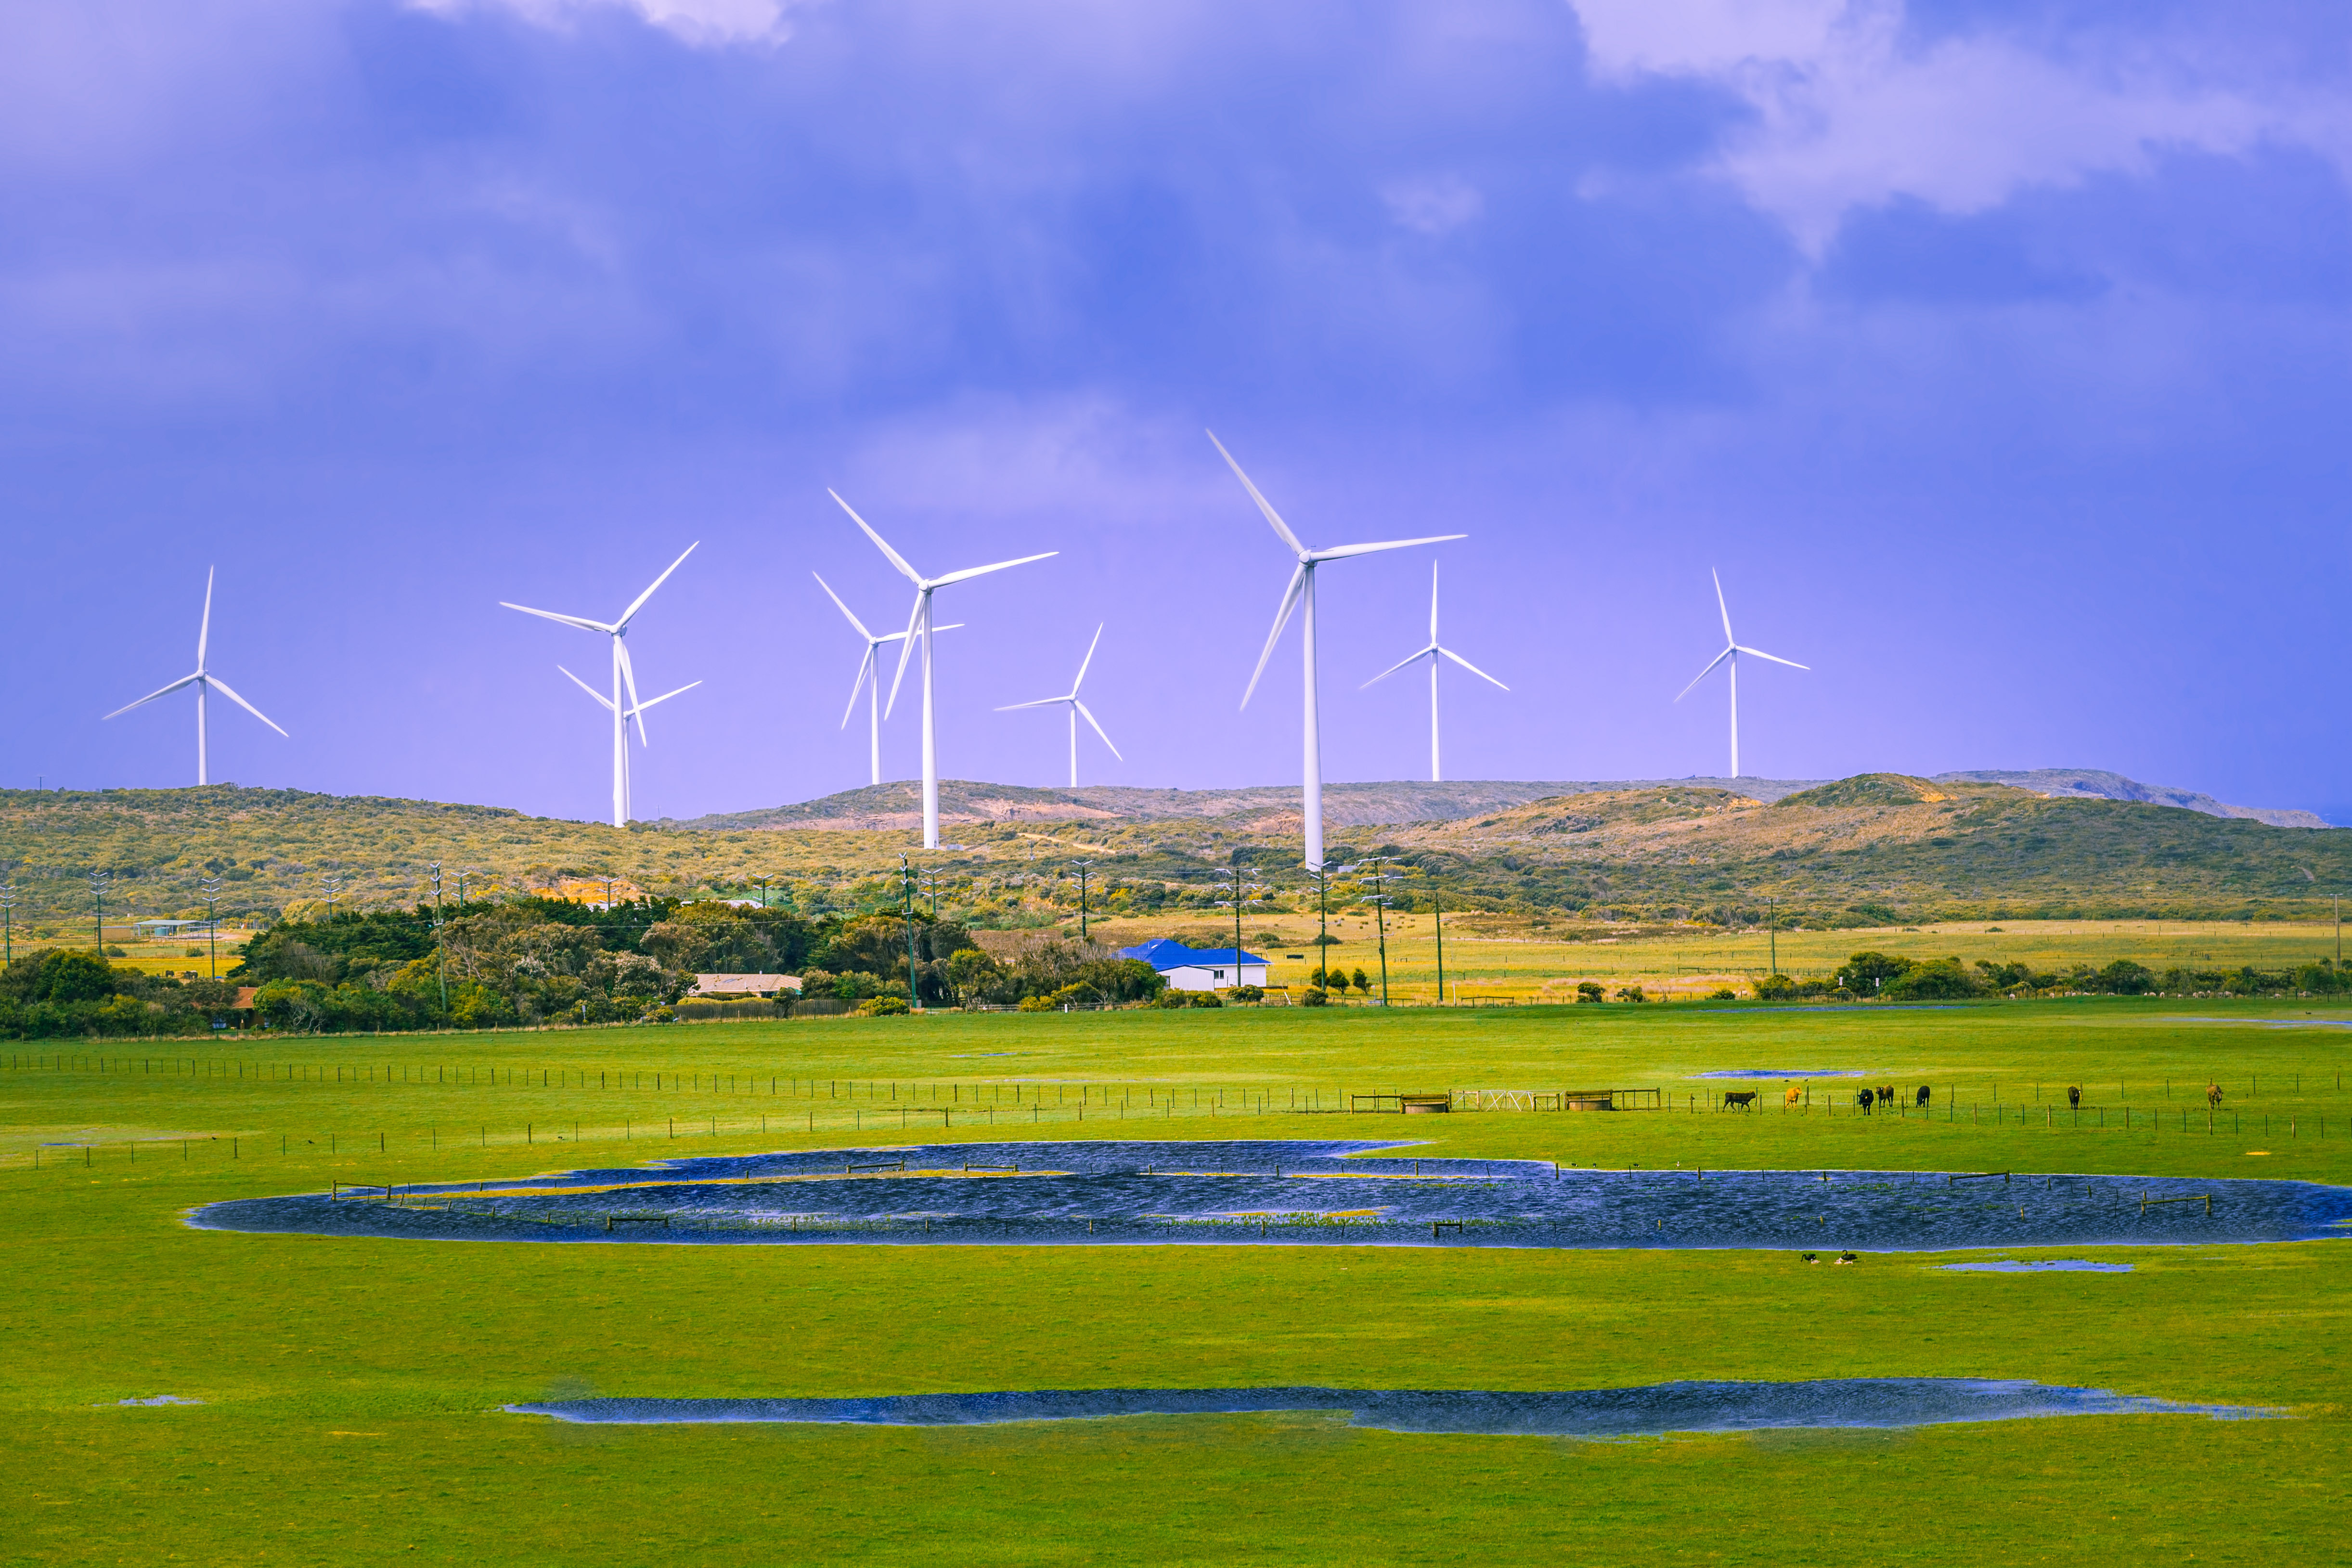 Rural area in australia with pastures and wind turbines